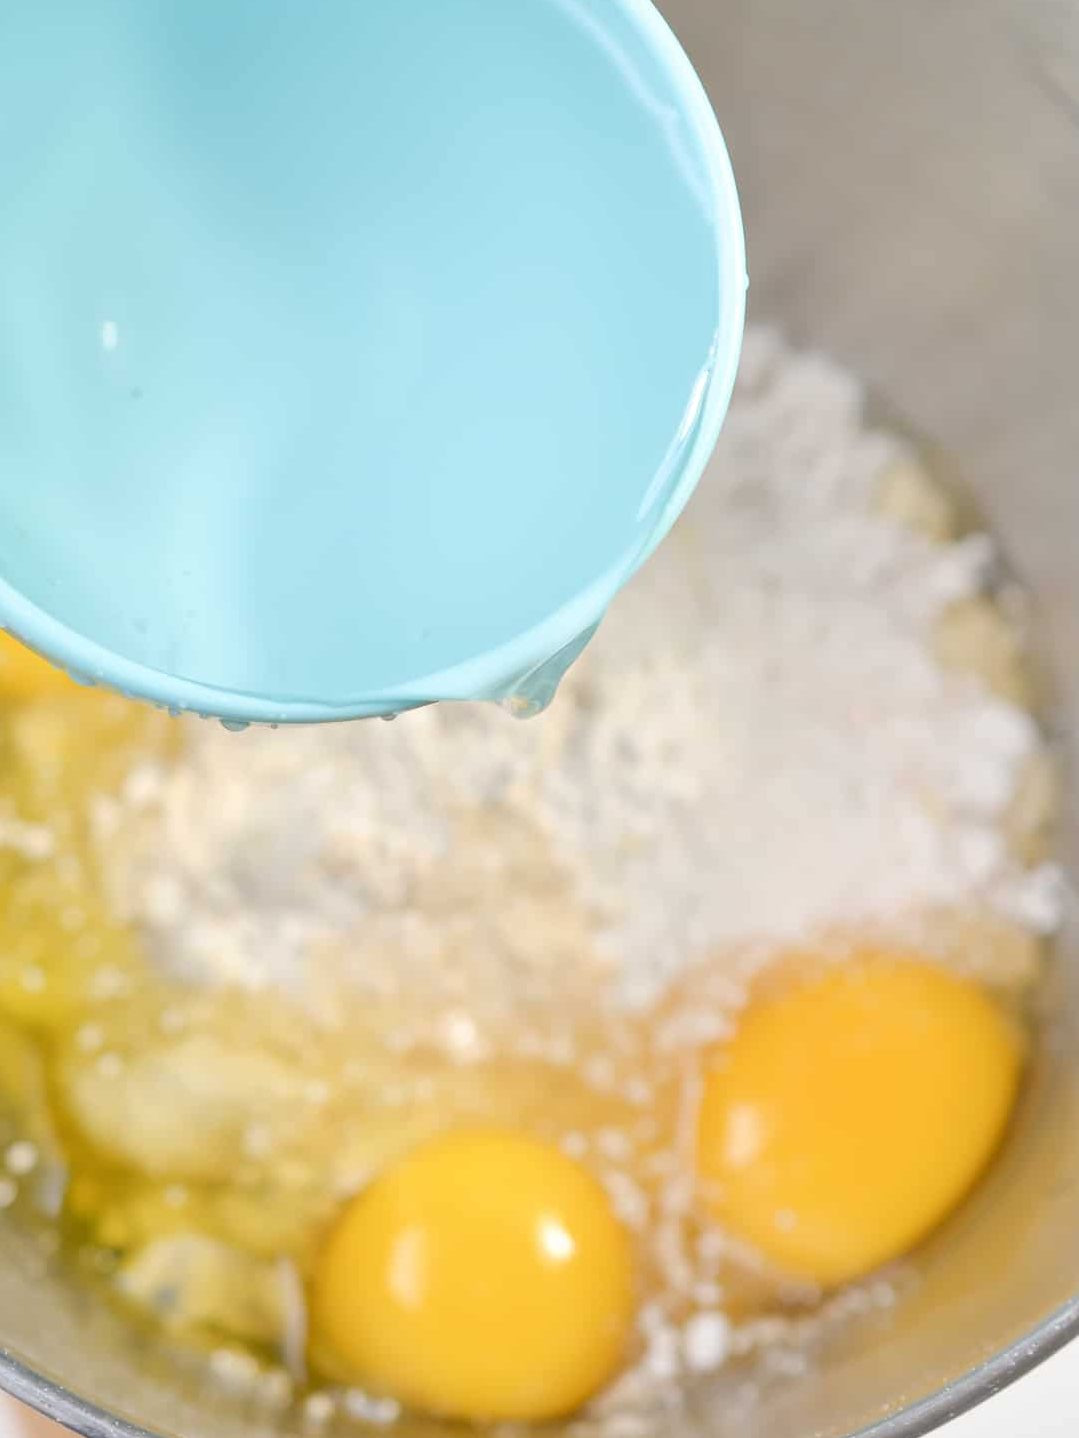 In a mixing bowl, combine the cake mix, eggs, and water.